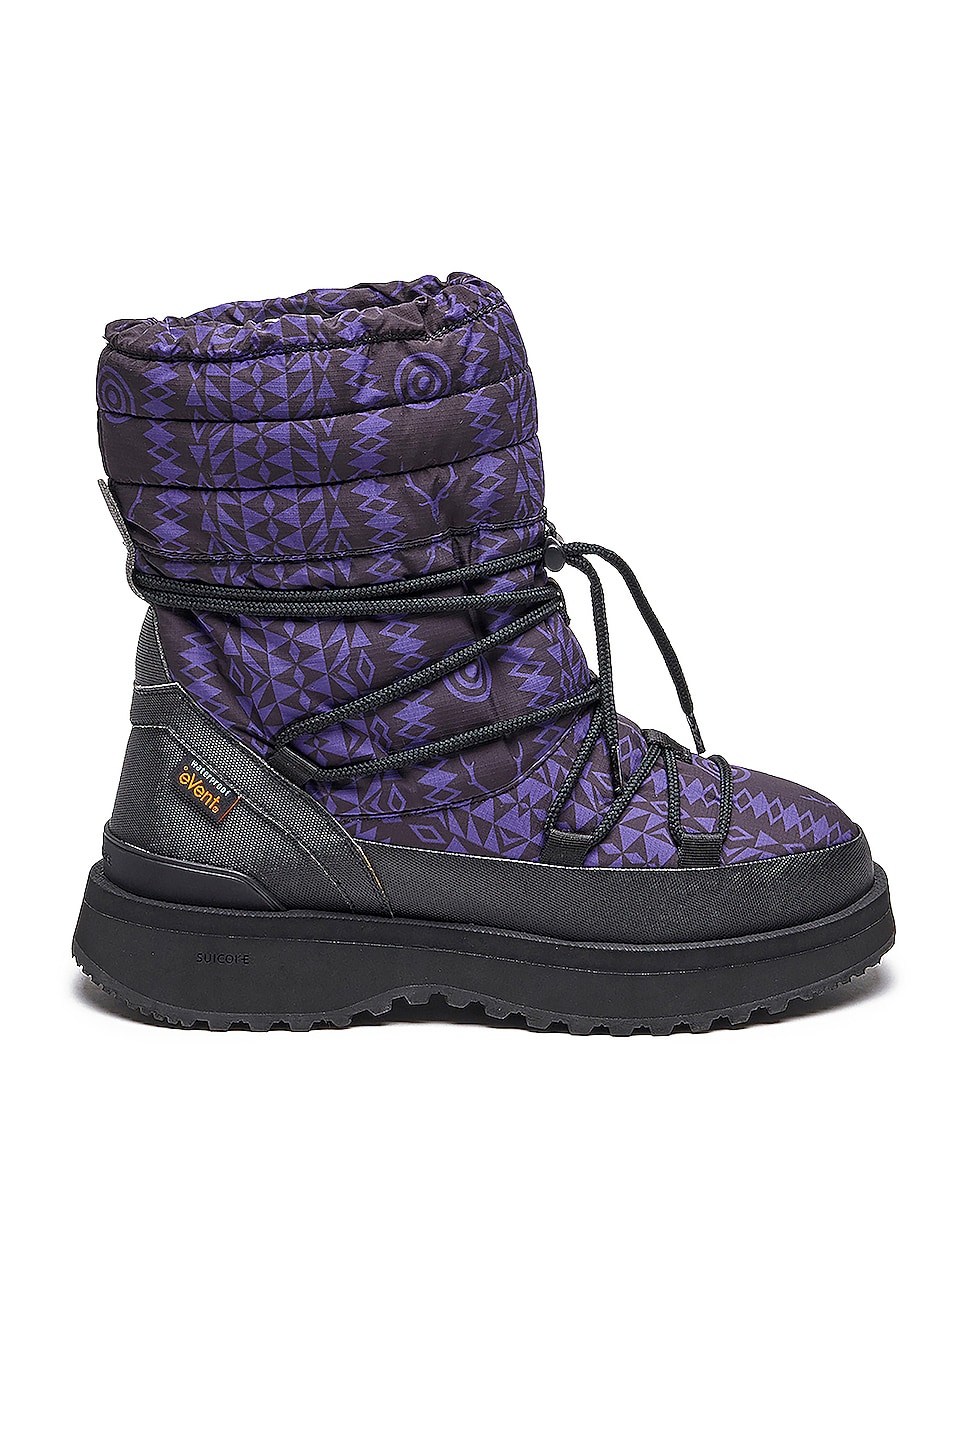 Image 1 of South2 West8 x Suicoke Bower-evab Hi-lace in Native